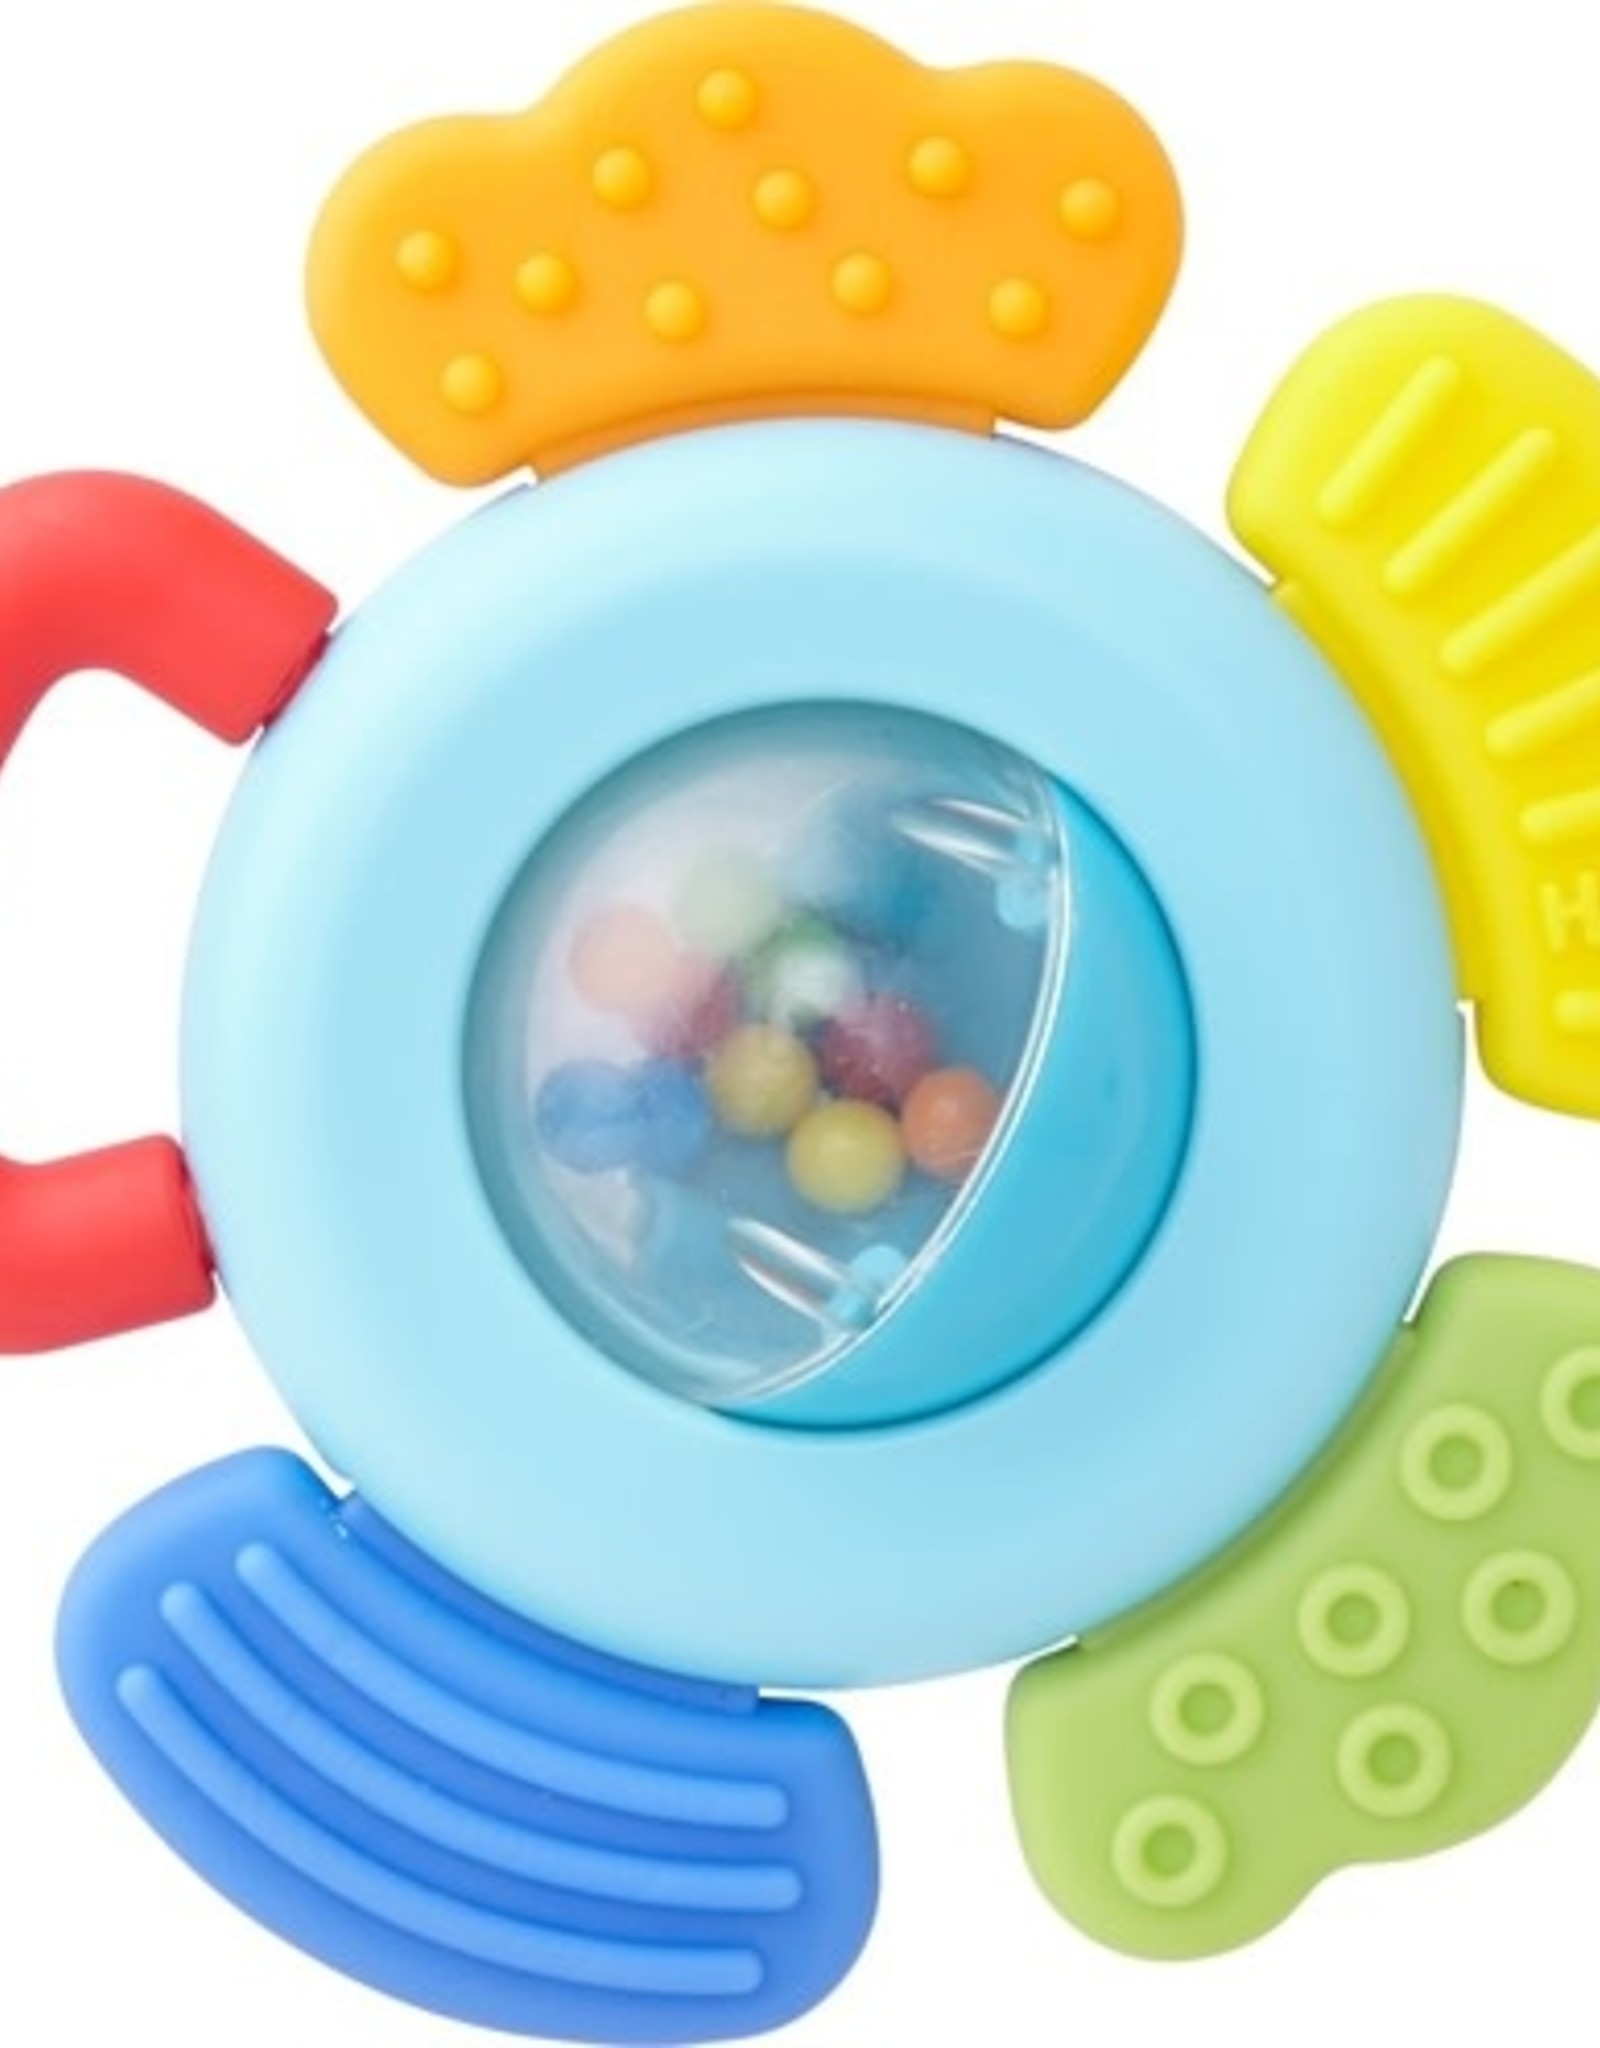 Haba Blossom Rattle & Teething Toy